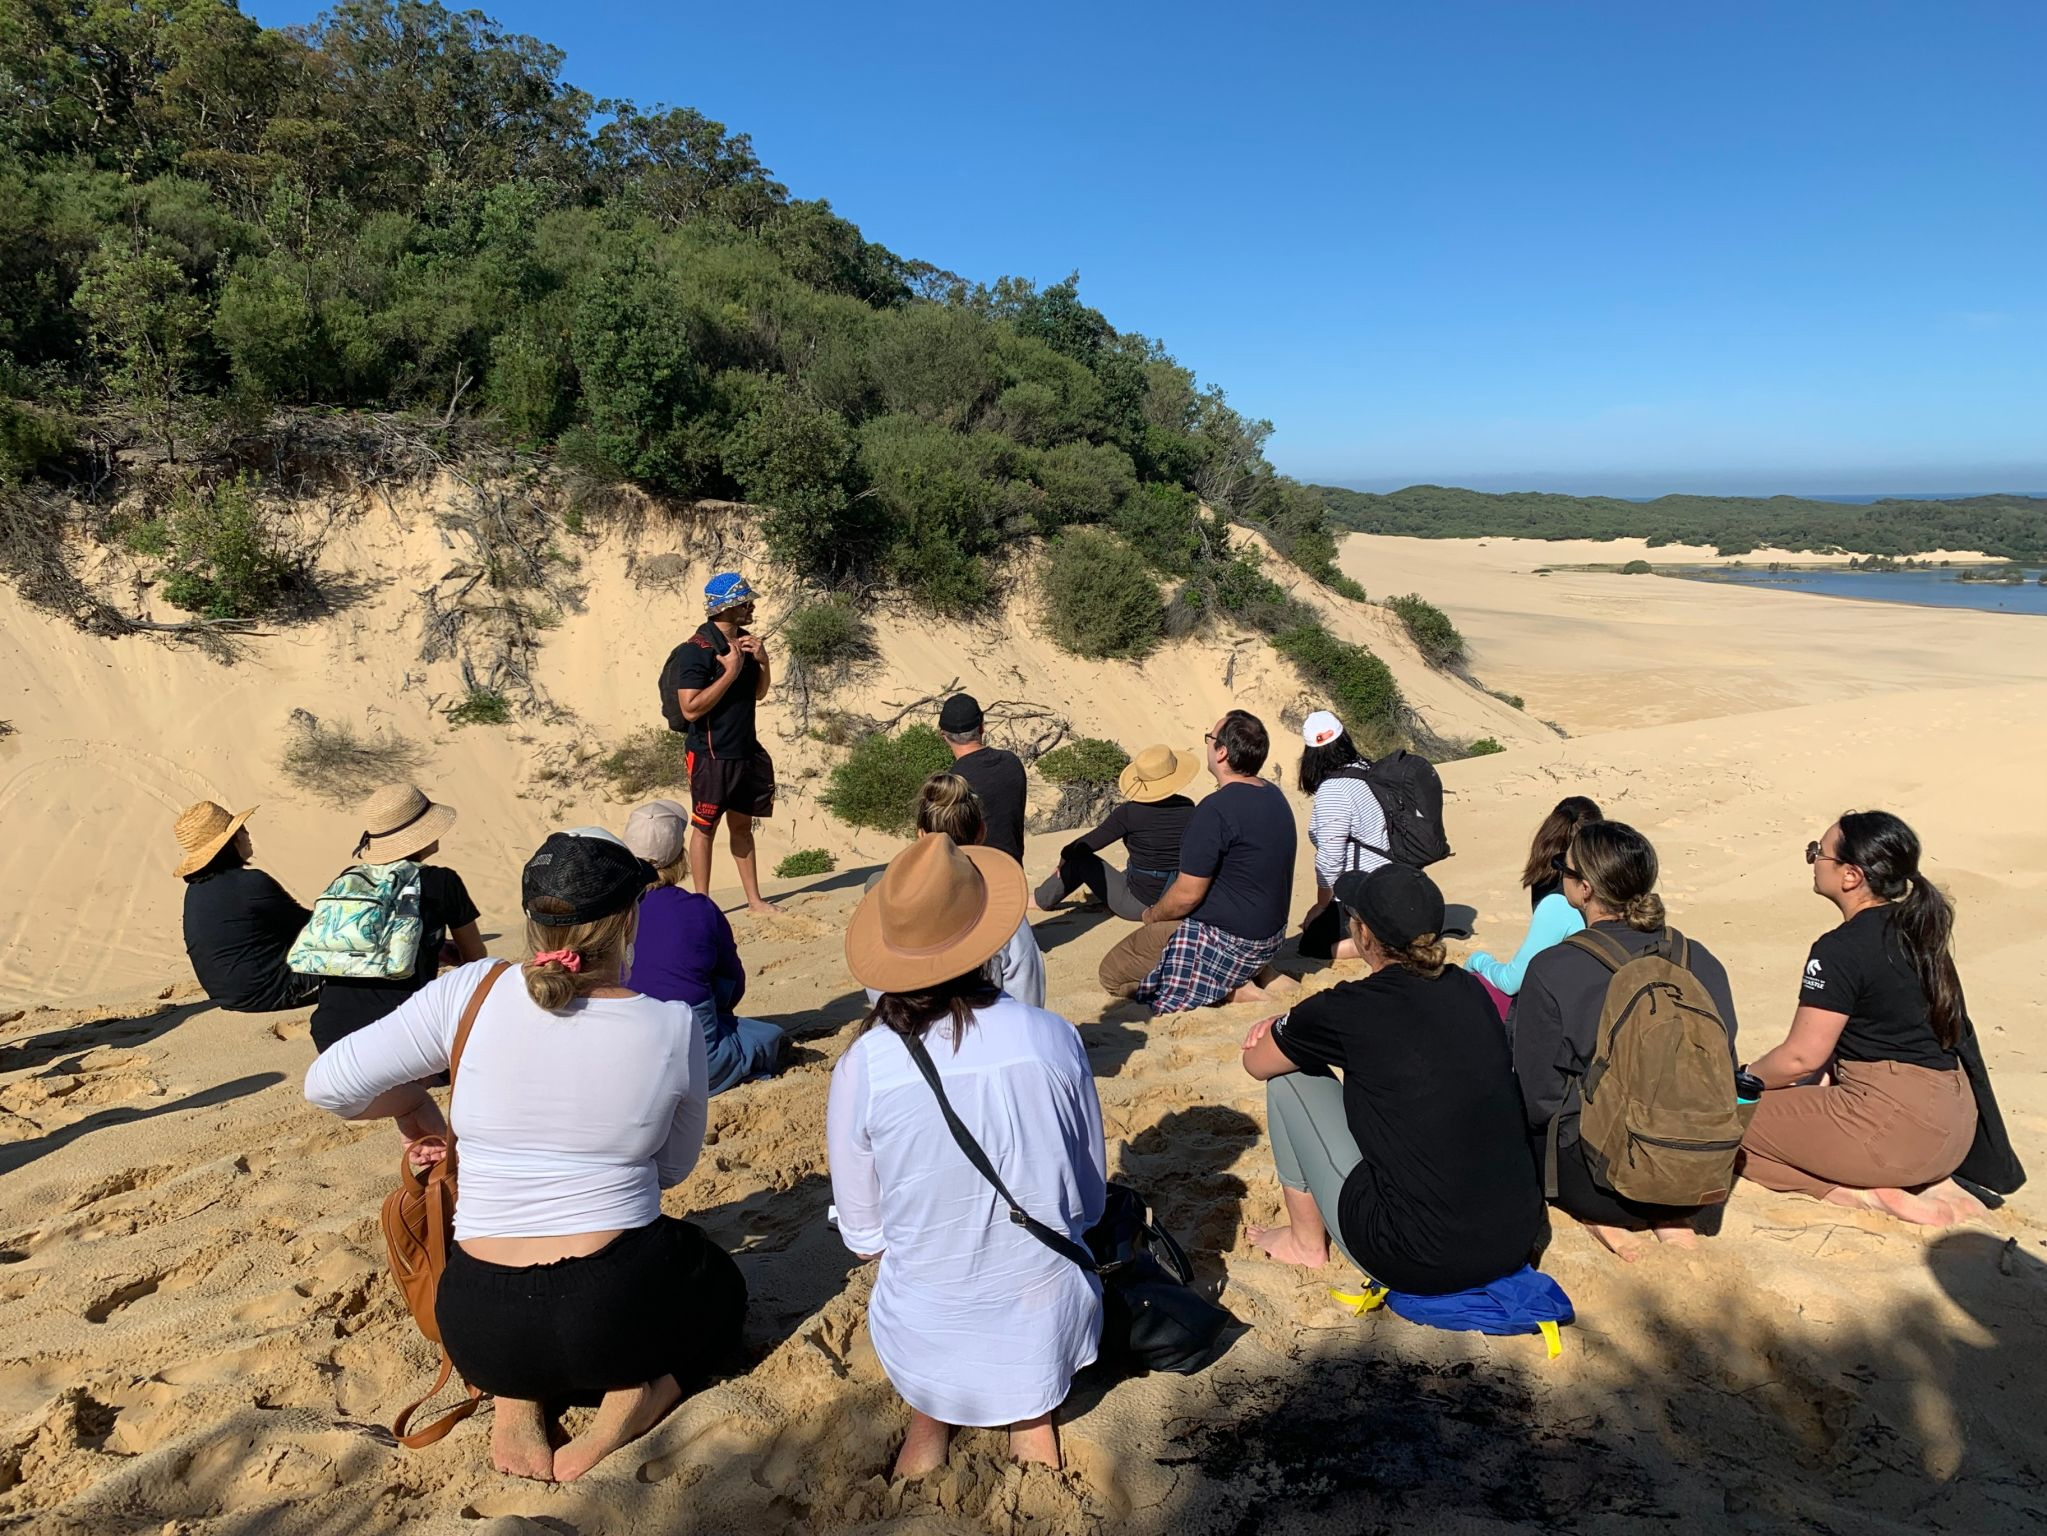 A group of people sit in a circle on sand dunes listening to the speaker who is standing^empty:{ds__assetid^as_asset:asset_name}